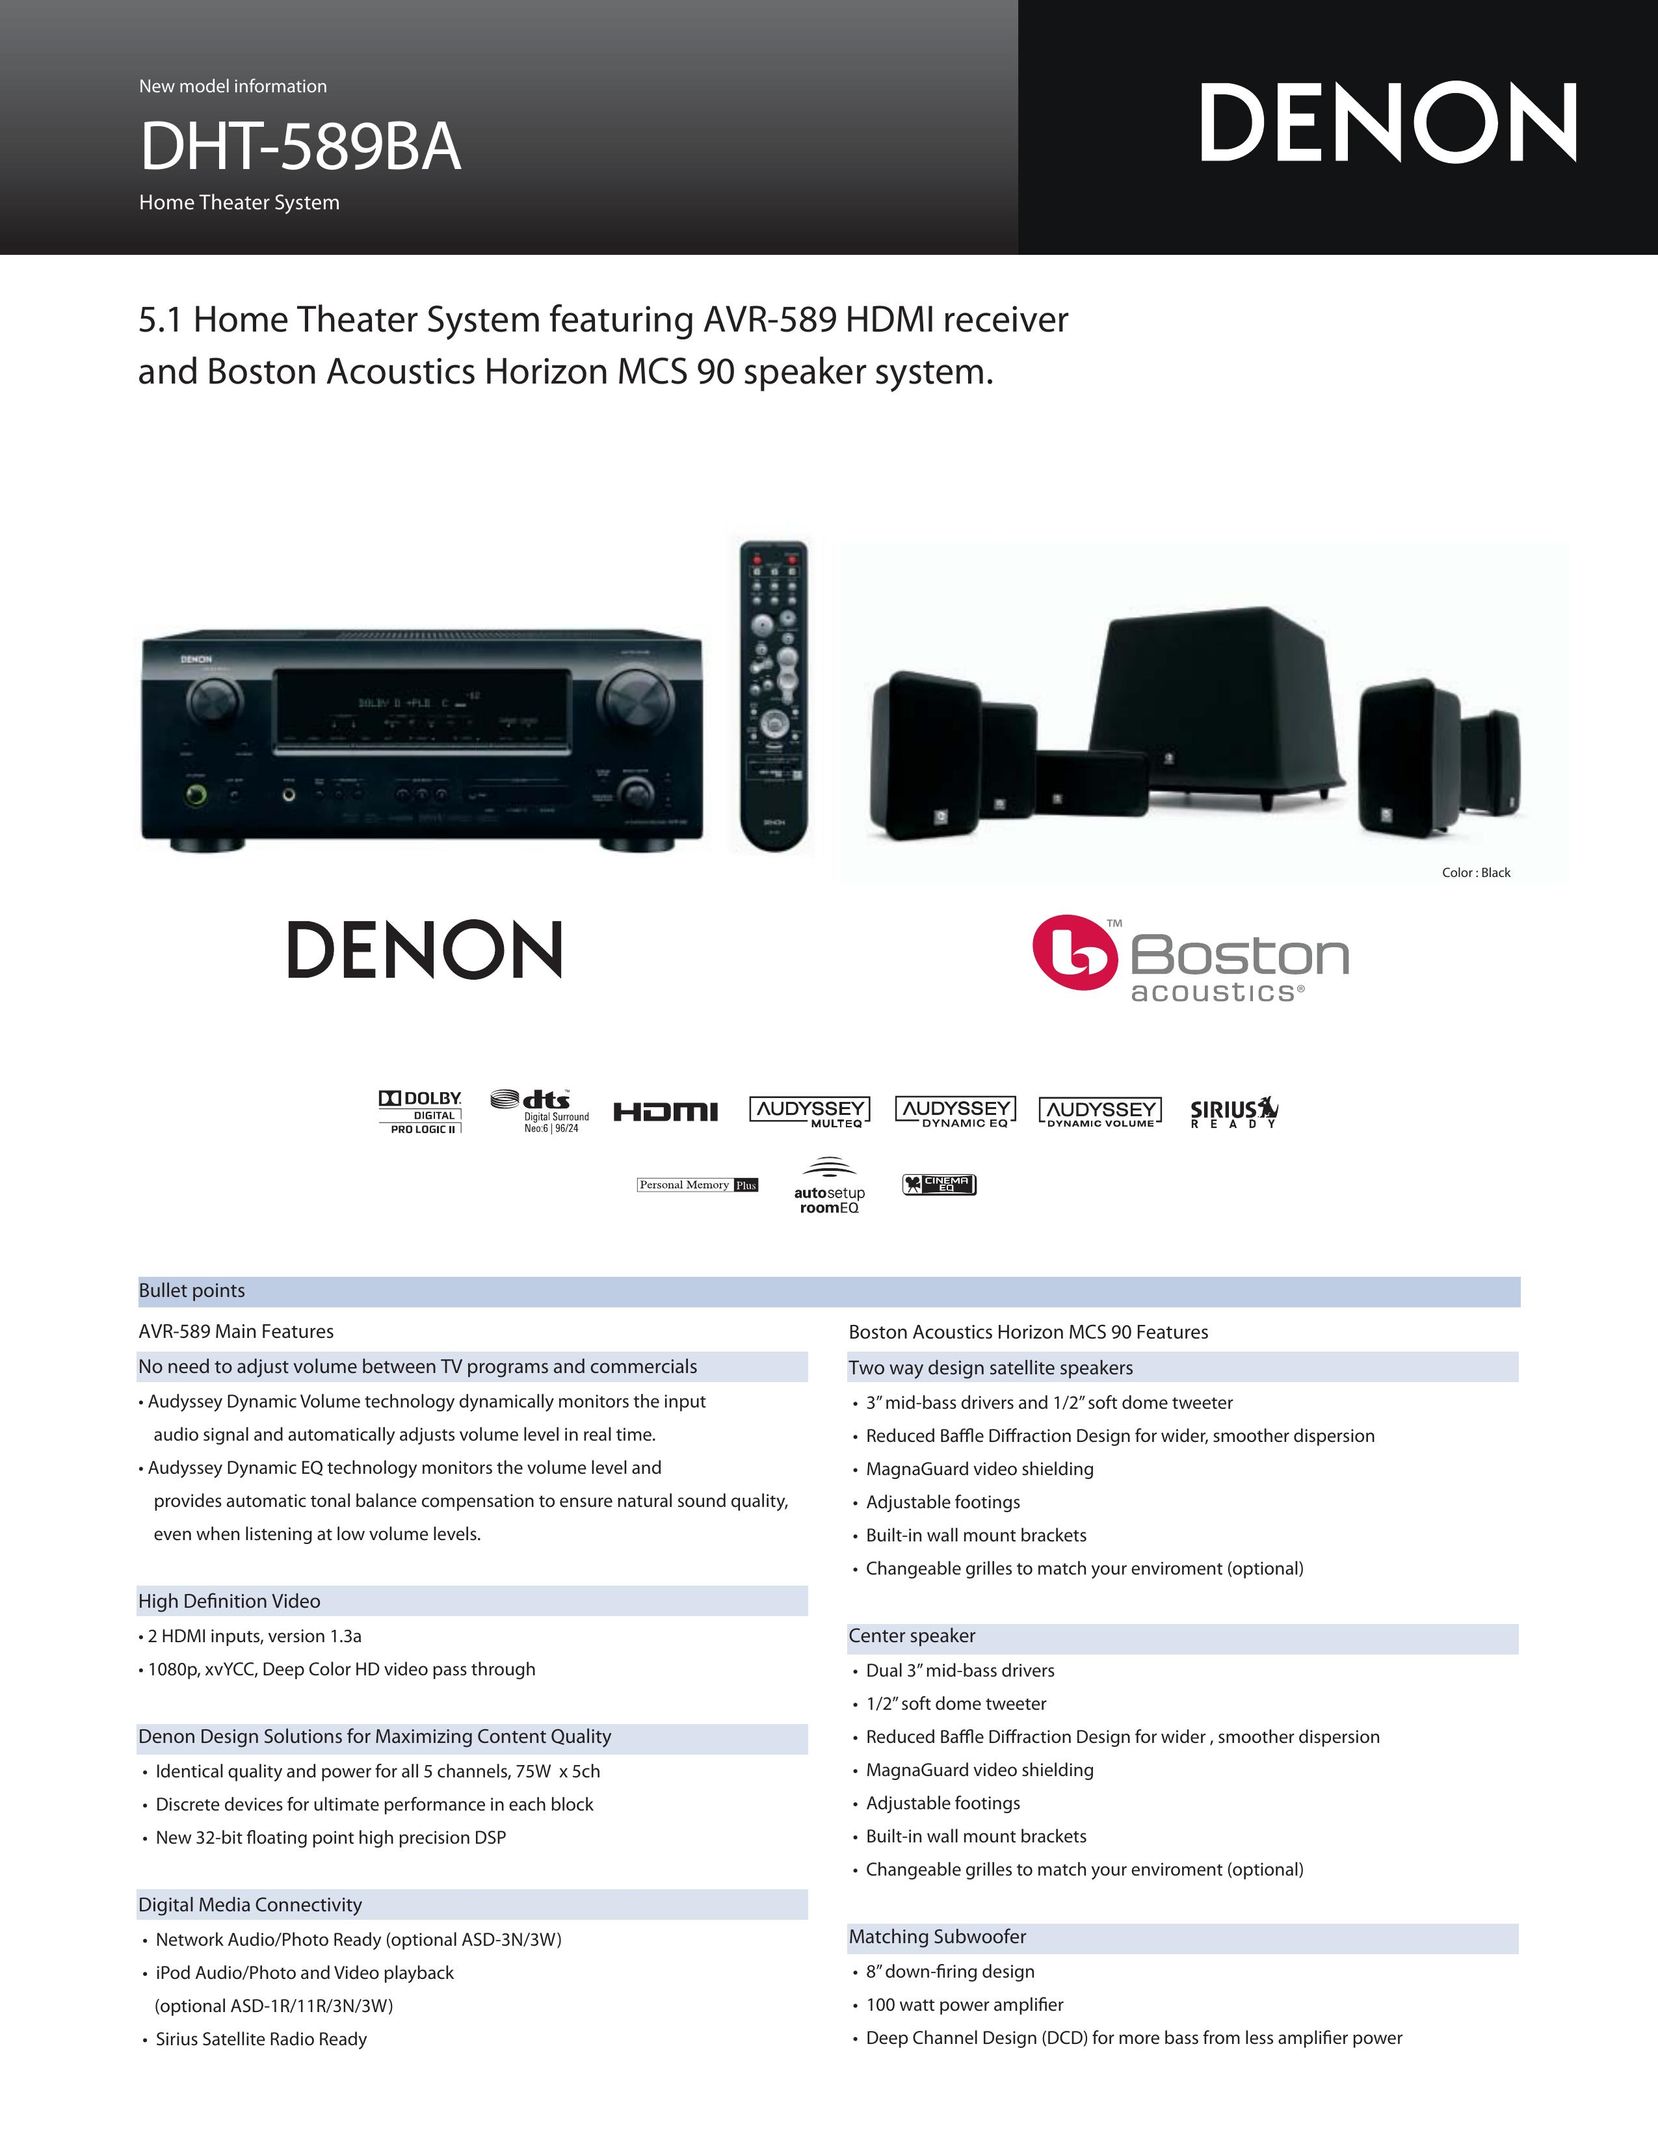 Denon DHT-589BA Home Theater System User Manual